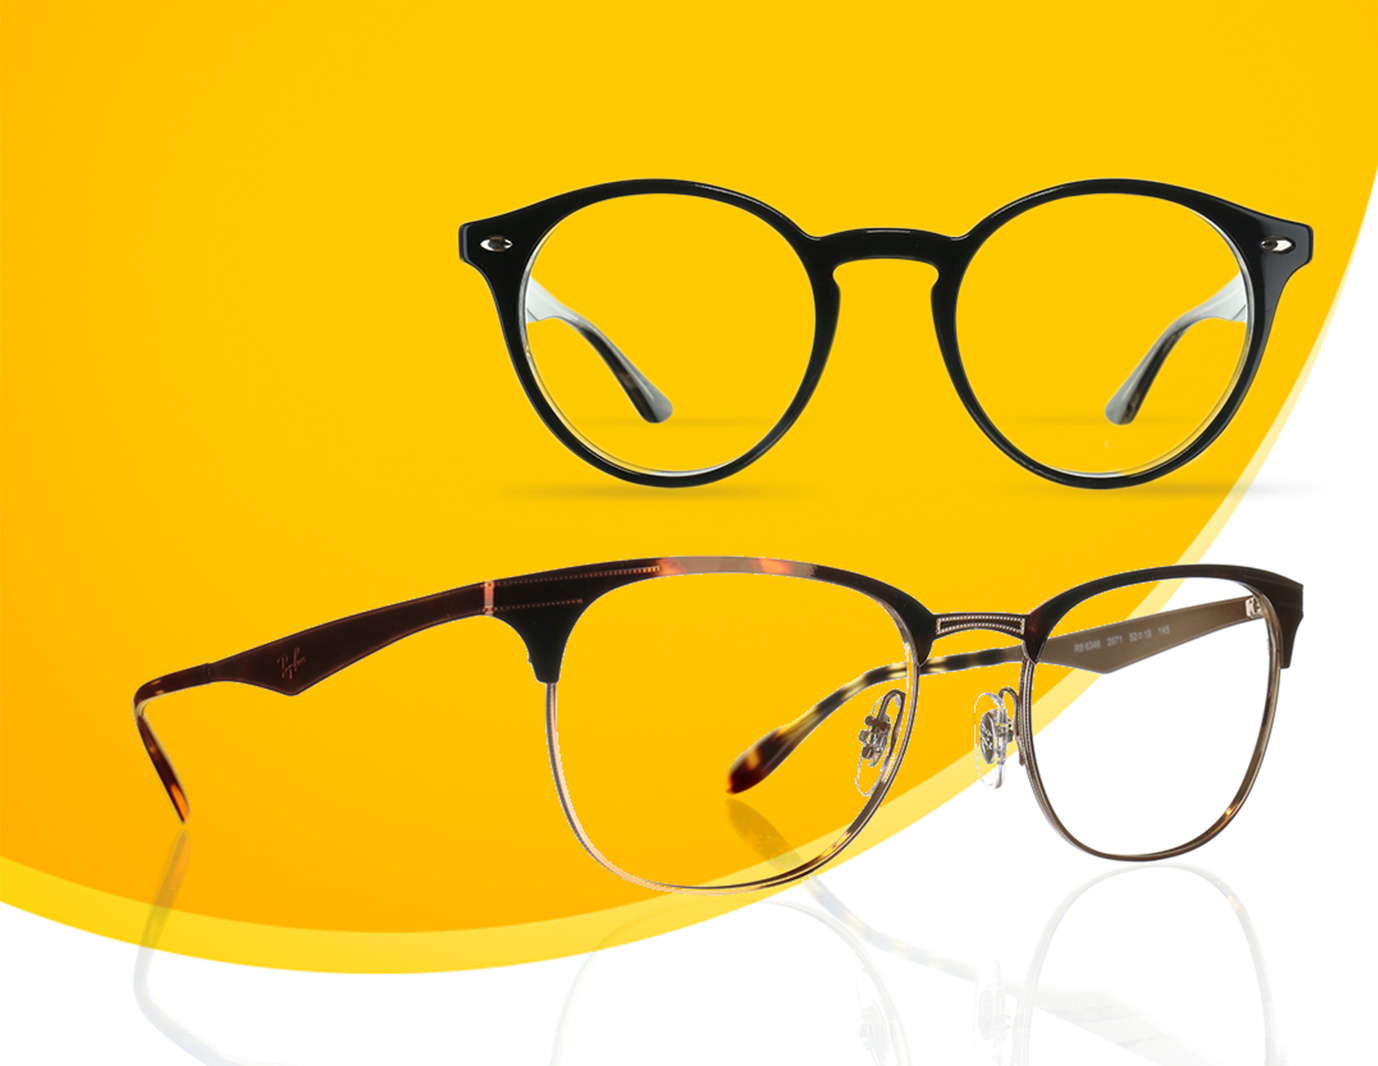 Tips to Care for Your Glasses, Eyes, and Contact Lenses